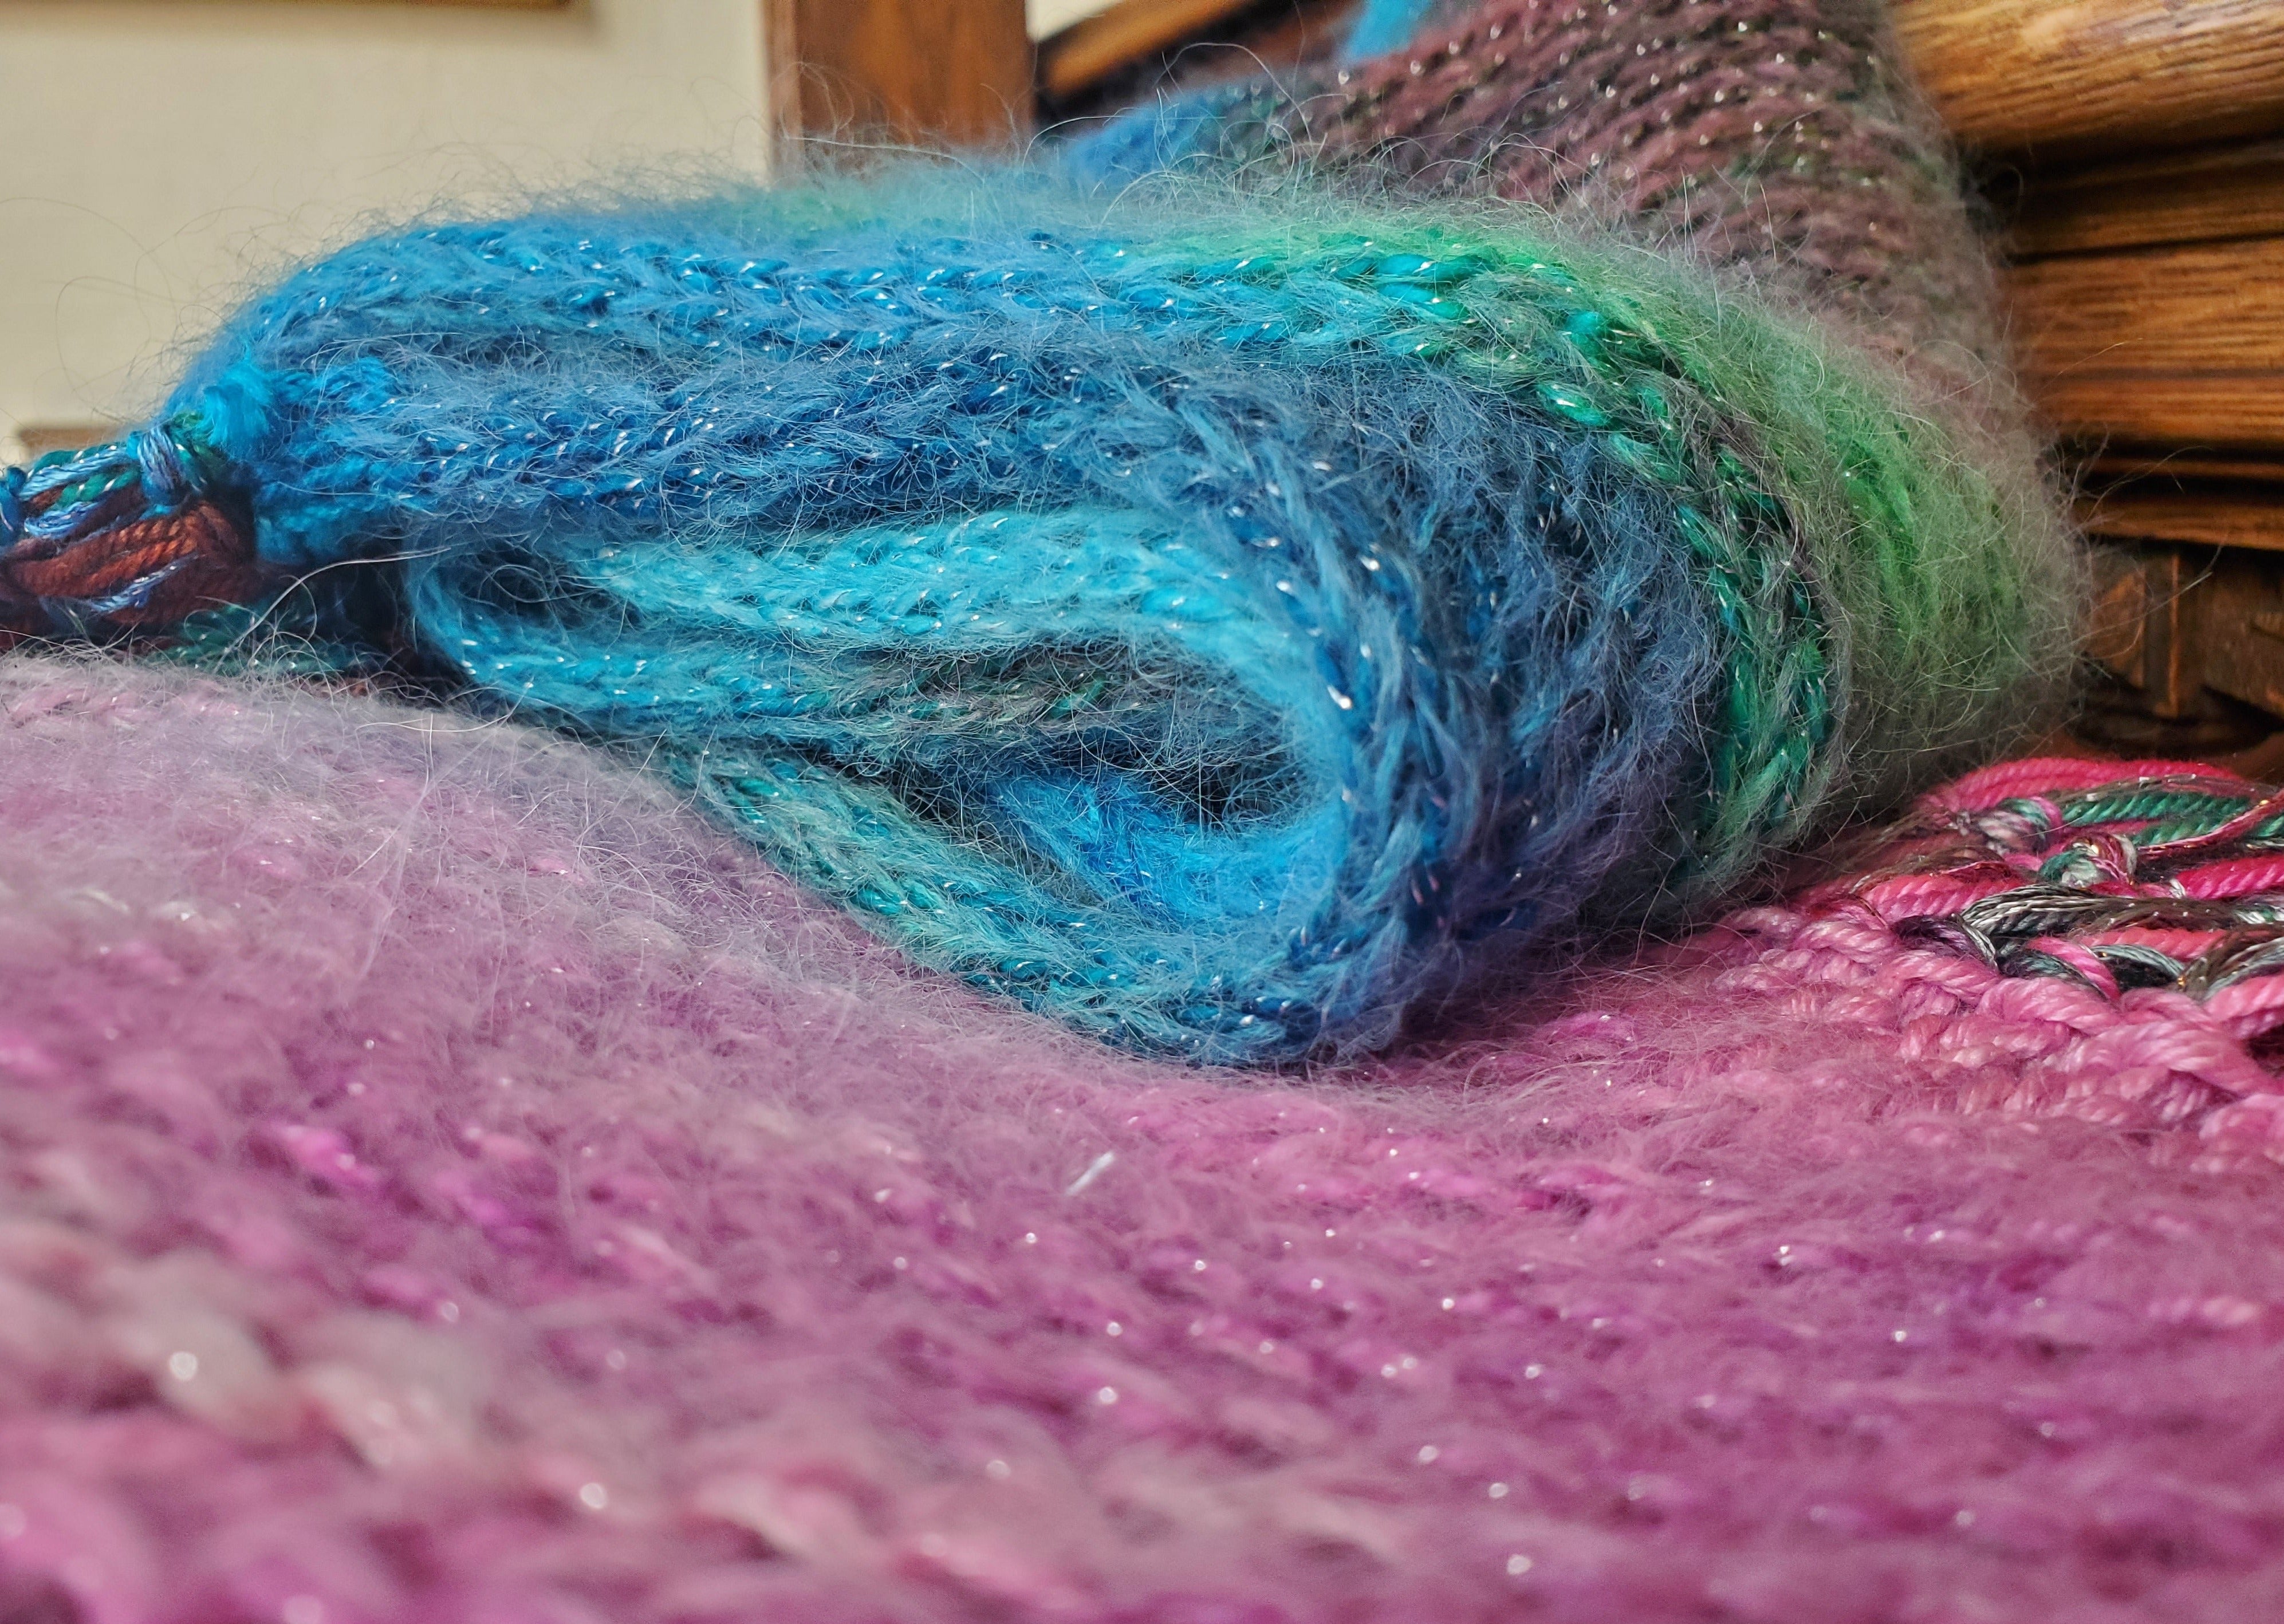 Rough Point Hand-Crafted Artisan Shawl